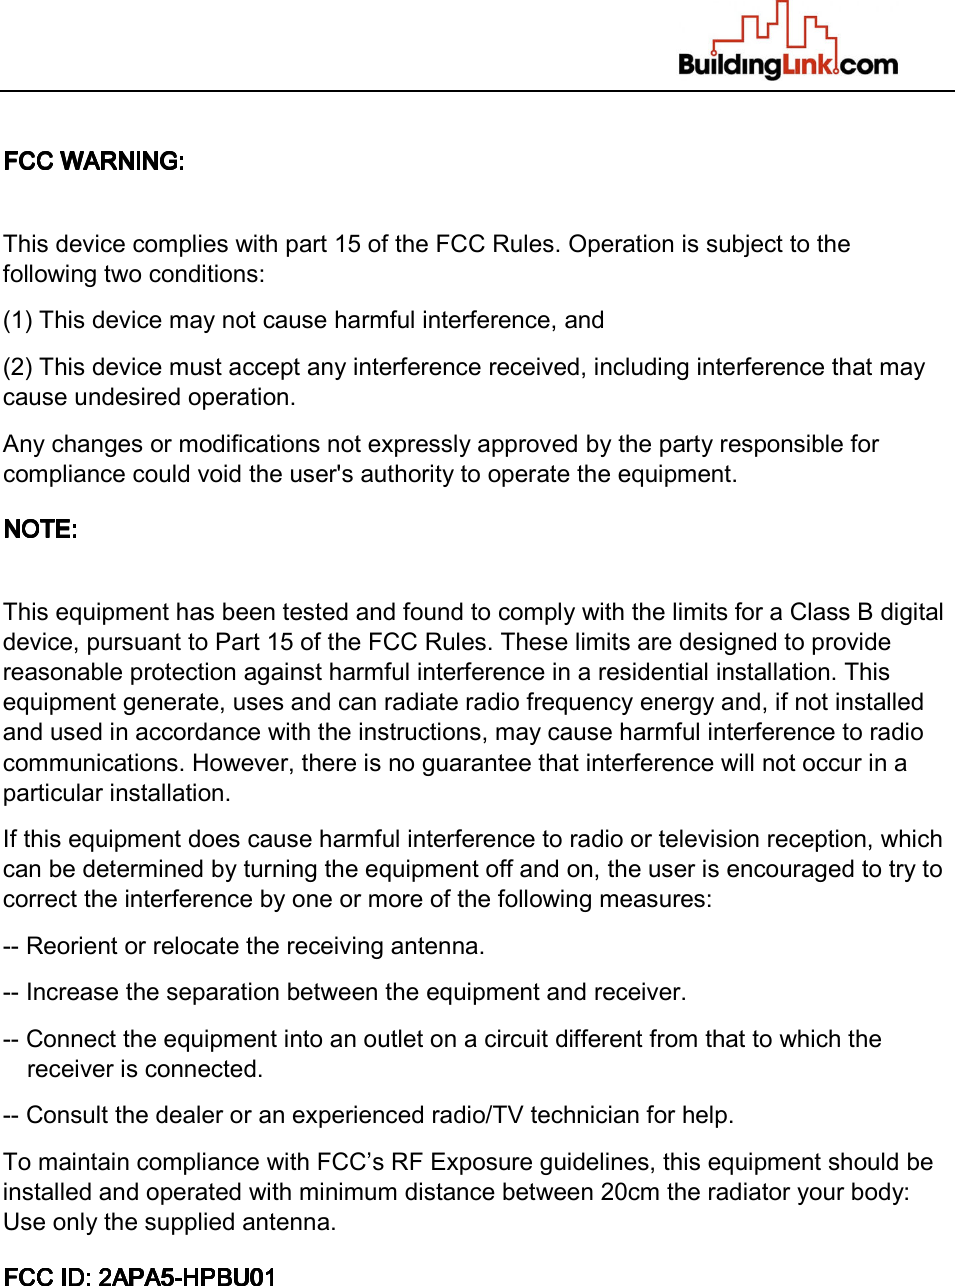   This device complies with part 15 of the FCC Rules. Operation is subject to the following two conditions:  (1) This device may not cause harmful interference, and (2) This device must accept any interference received, including interference that may cause undesired operation. Any changes or modifications not expressly approved by the party responsible for compliance could void the user&apos;s authority to operate the equipment. This equipment has been tested and found to comply with the limits for a Class B digital device, pursuant to Part 15 of the FCC Rules. These limits are designed to provide reasonable protection against harmful interference in a residential installation. This equipment generate, uses and can radiate radio frequency energy and, if not installed and used in accordance with the instructions, may cause harmful interference to radio communications. However, there is no guarantee that interference will not occur in a particular installation. If this equipment does cause harmful interference to radio or television reception, which can be determined by turning the equipment off and on, the user is encouraged to try to correct the interference by one or more of the following measures: -- Reorient or relocate the receiving antenna. -- Increase the separation between the equipment and receiver. -- Connect the equipment into an outlet on a circuit different from that to which the receiver is connected. -- Consult the dealer or an experienced radio/TV technician for help. To maintain compliance with FCC’s RF Exposure guidelines, this equipment should be installed and operated with minimum distance between 20cm the radiator your body: Use only the supplied antenna. 